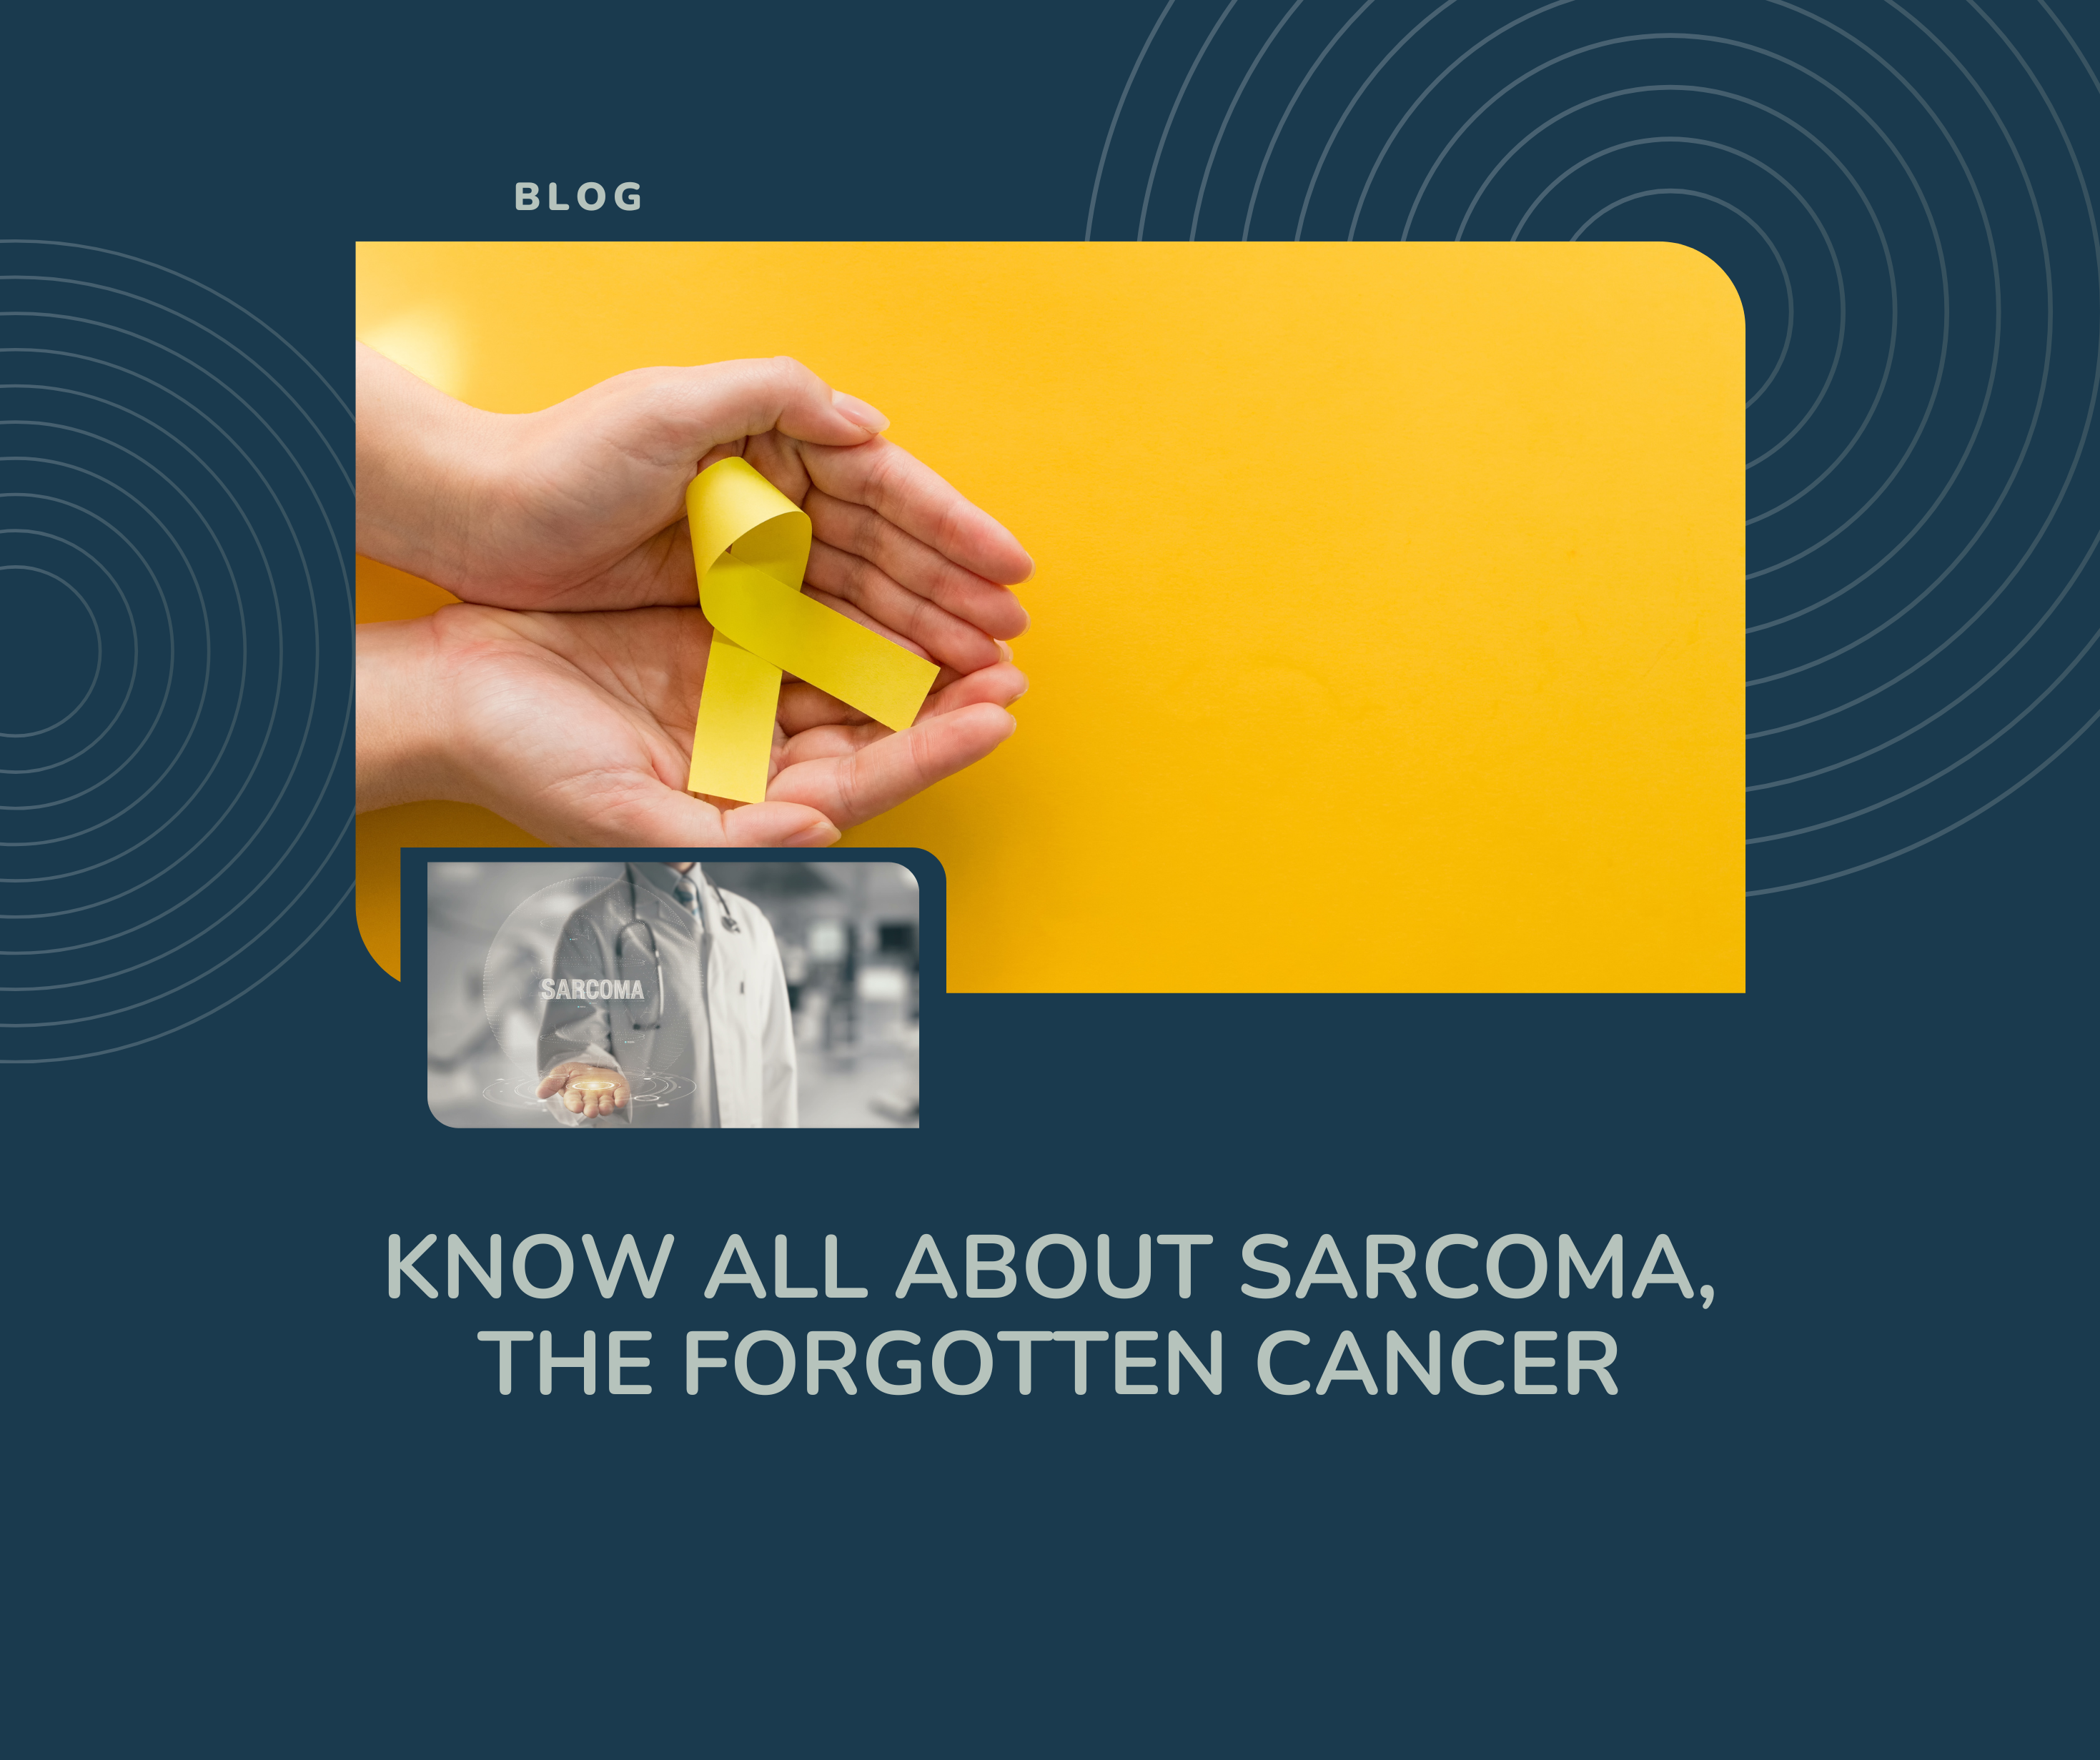 Know All About Sarcoma, the Forgotten Cancer